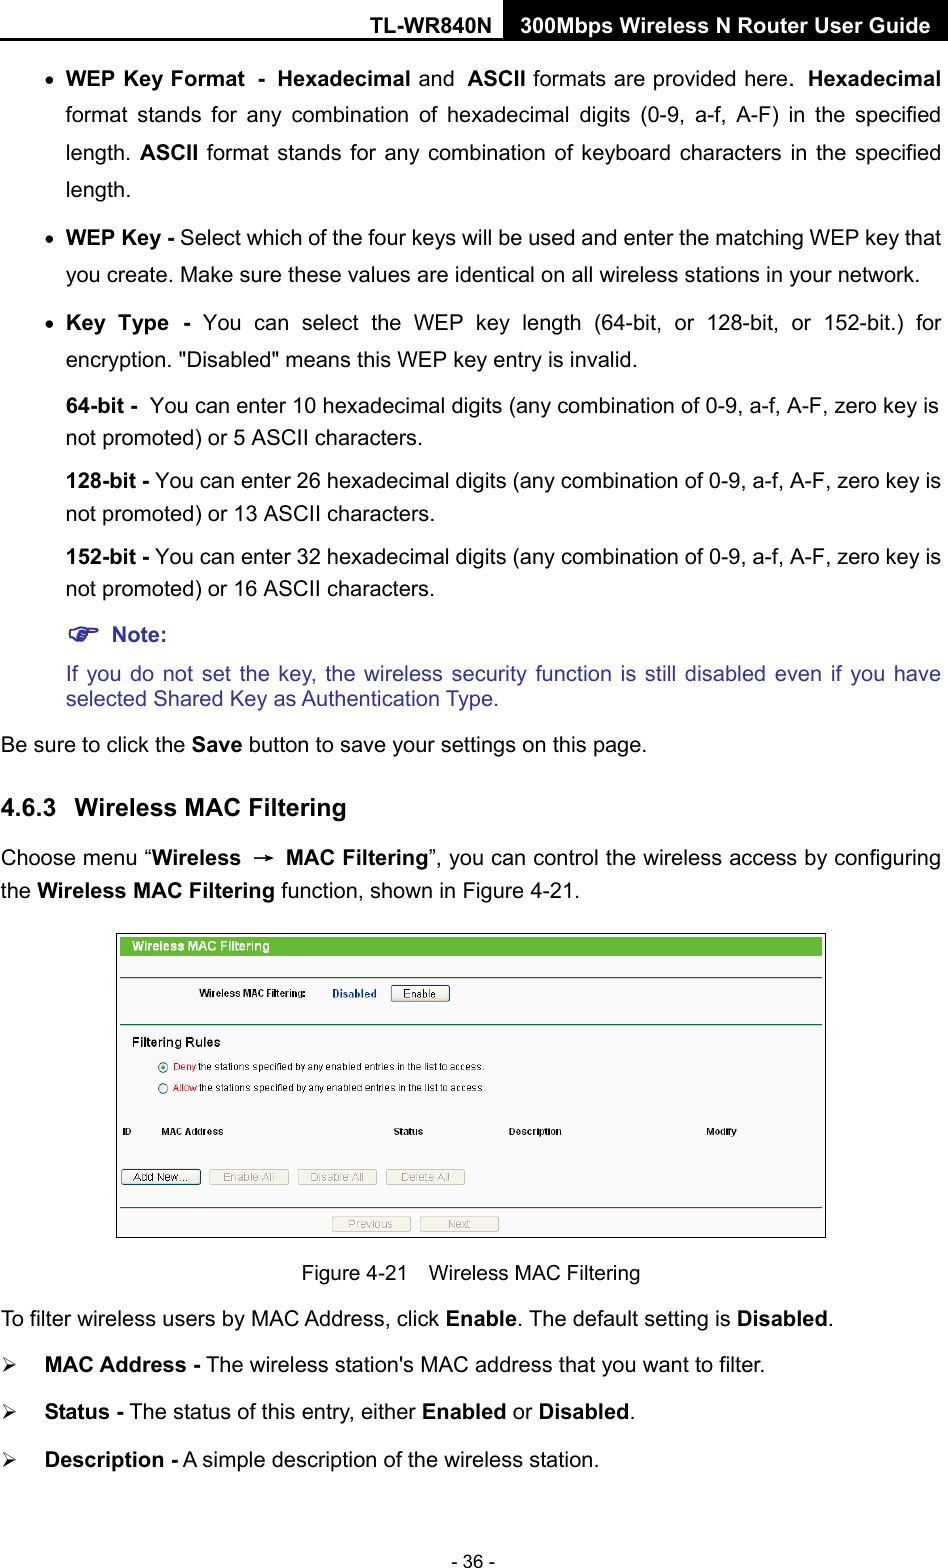 TL-WR840N 300Mbps Wireless N Router User Guide  - 36 - • WEP Key Format - Hexadecimal and ASCII formats are provided here. Hexadecimal format stands for any combination of hexadecimal digits (0-9, a-f, A-F) in the specified length. ASCII format stands for any combination of keyboard characters in the specified length.   • WEP Key - Select which of the four keys will be used and enter the matching WEP key that you create. Make sure these values are identical on all wireless stations in your network.   • Key Type - You can select the WEP key length (64-bit, or 128-bit, or 152-bit.) for encryption. &quot;Disabled&quot; means this WEP key entry is invalid. 64-bit - You can enter 10 hexadecimal digits (any combination of 0-9, a-f, A-F, zero key is not promoted) or 5 ASCII characters.   128-bit - You can enter 26 hexadecimal digits (any combination of 0-9, a-f, A-F, zero key is not promoted) or 13 ASCII characters.   152-bit - You can enter 32 hexadecimal digits (any combination of 0-9, a-f, A-F, zero key is not promoted) or 16 ASCII characters.    Note:   If you do not set the key, the wireless security function is still disabled even if you have selected Shared Key as Authentication Type.   Be sure to click the Save button to save your settings on this page. 4.6.3 Wireless MAC Filtering  Choose menu “Wireless → MAC Filtering”, you can control the wireless access by configuring the Wireless MAC Filtering function, shown in Figure 4-21.  Figure 4-21  Wireless MAC Filtering To filter wireless users by MAC Address, click Enable. The default setting is Disabled.  MAC Address - The wireless station&apos;s MAC address that you want to filter.    Status - The status of this entry, either Enabled or Disabled.  Description - A simple description of the wireless station.   